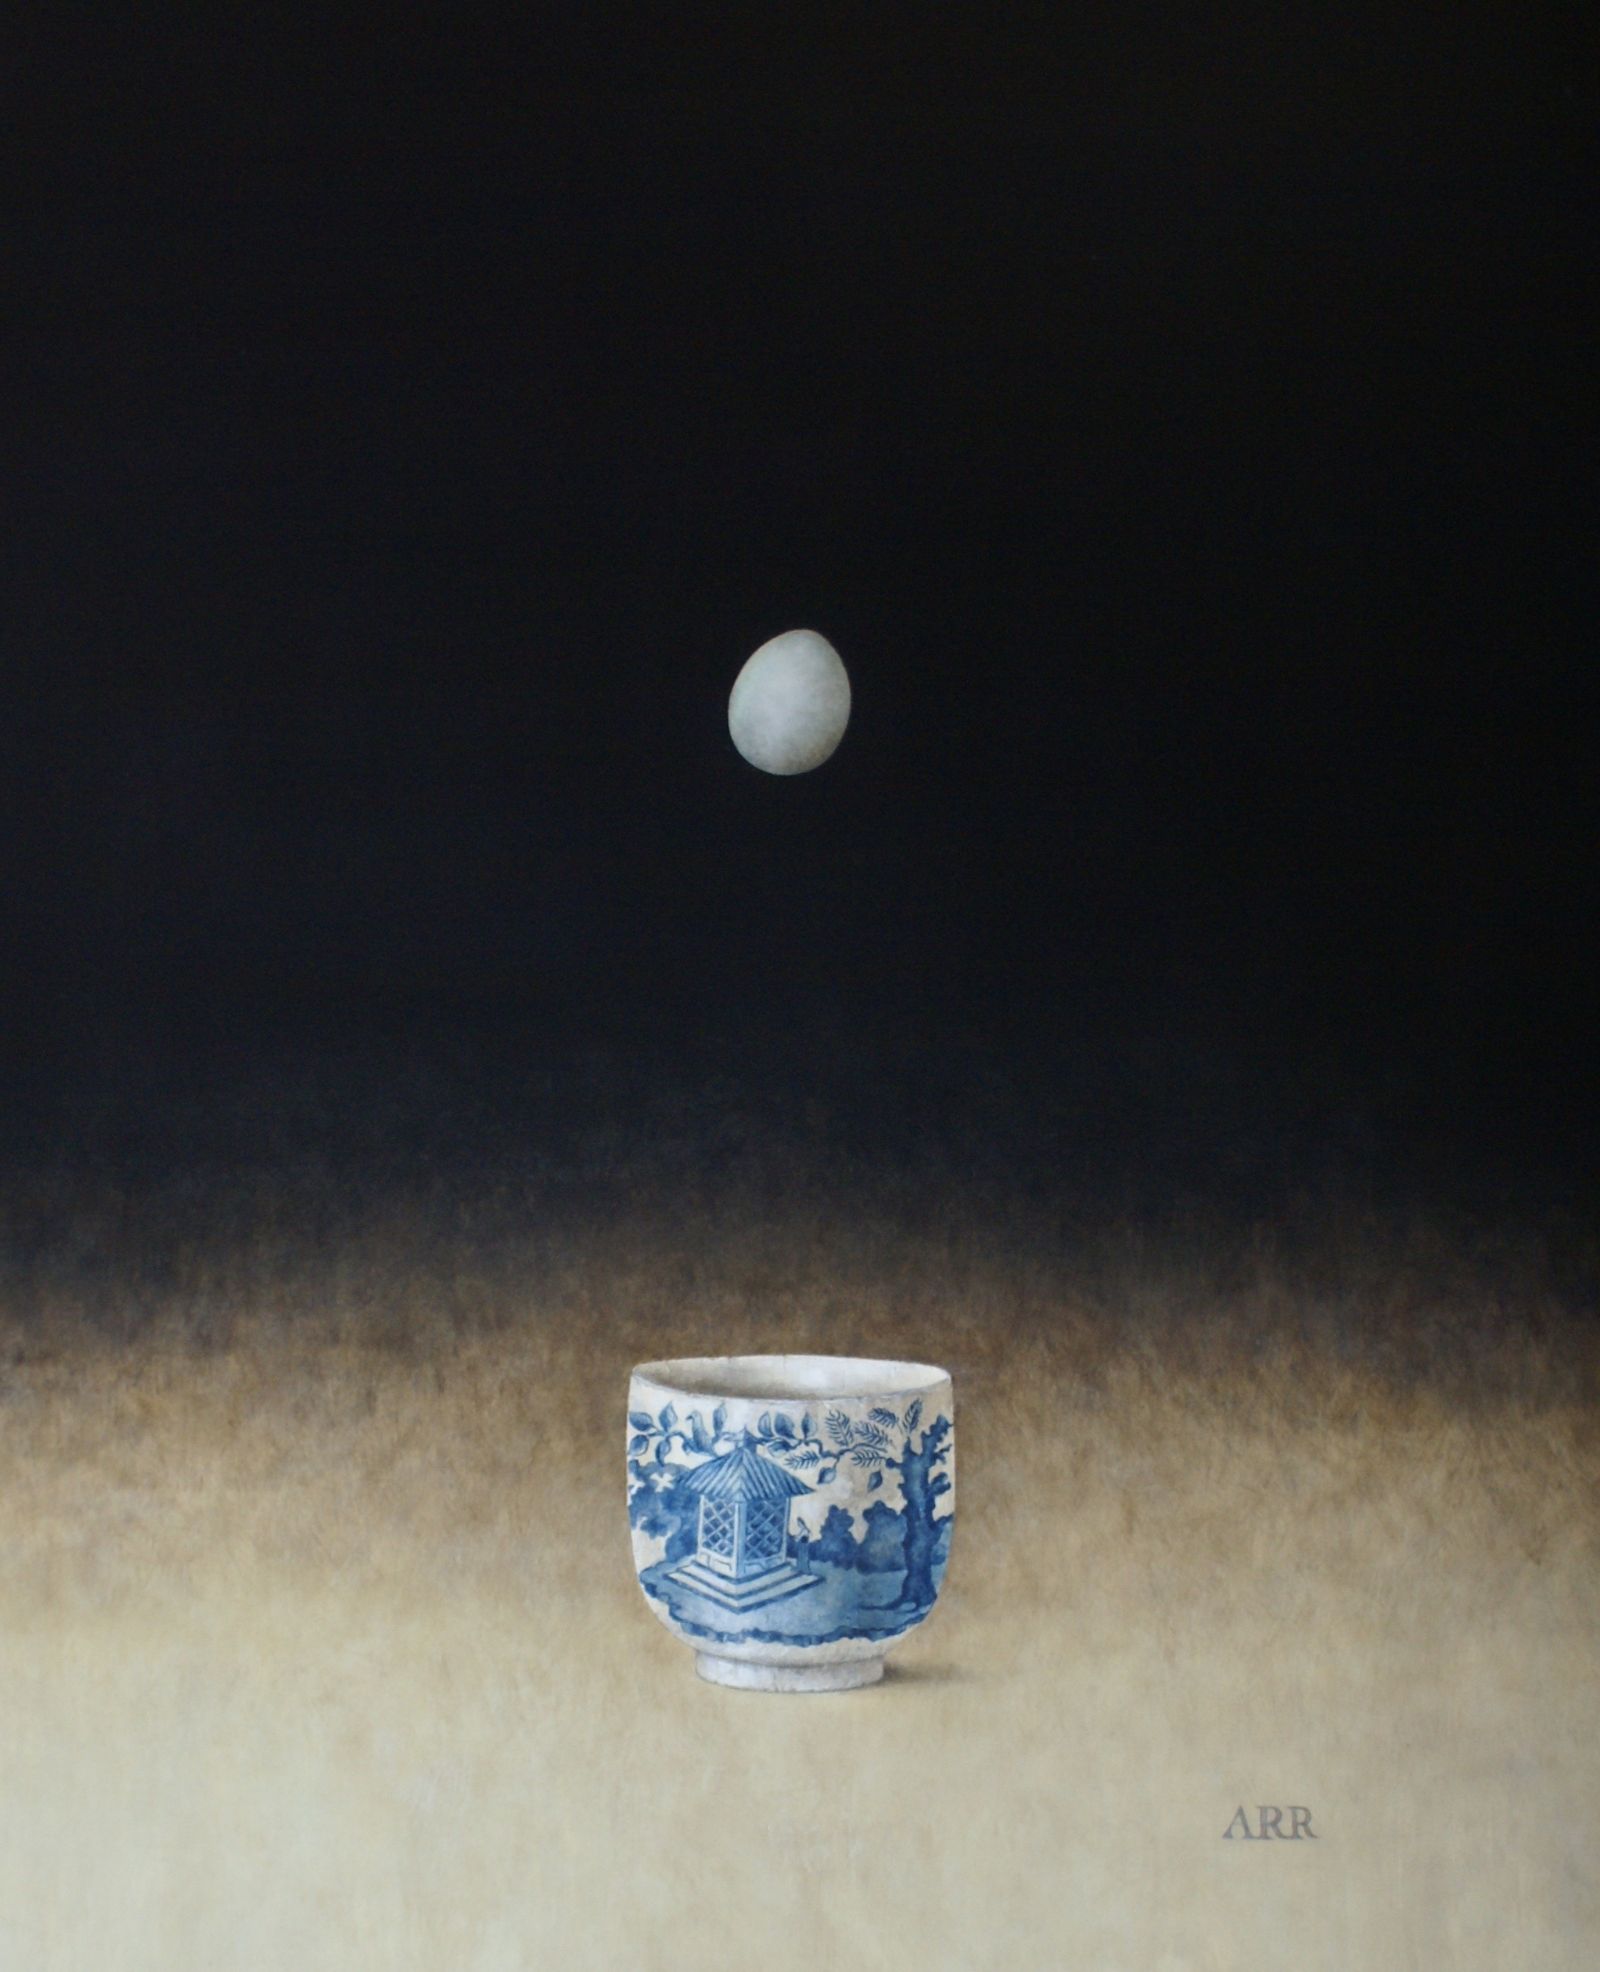 Chinese Jar with Falling Egg  by Alison Rankin